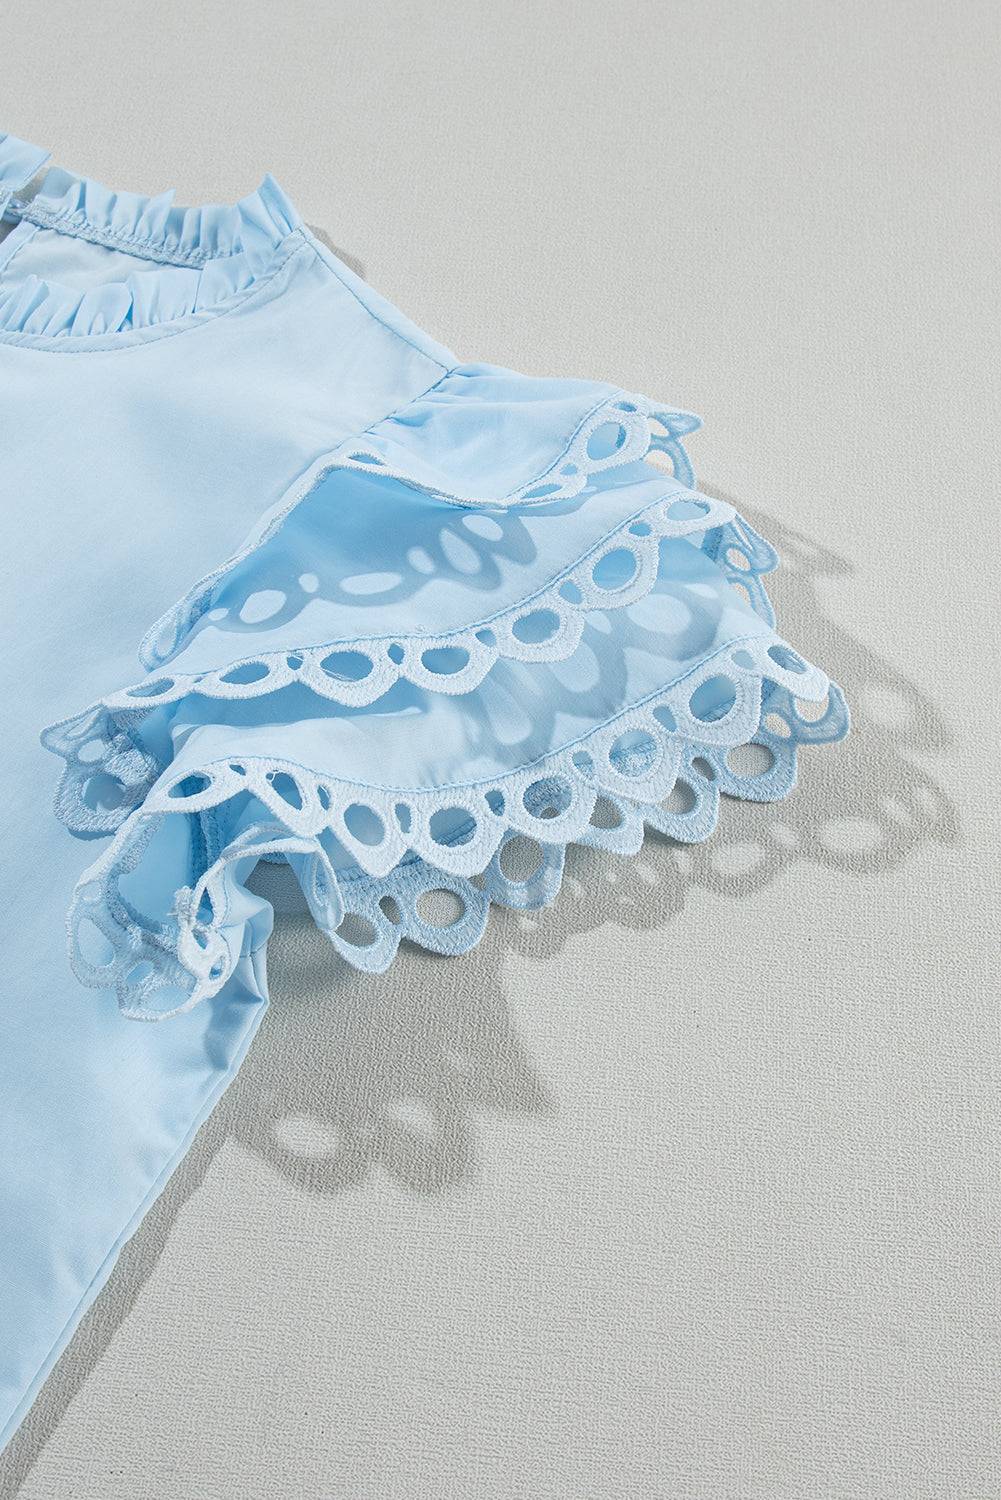 a blue dress laying on top of a white surface